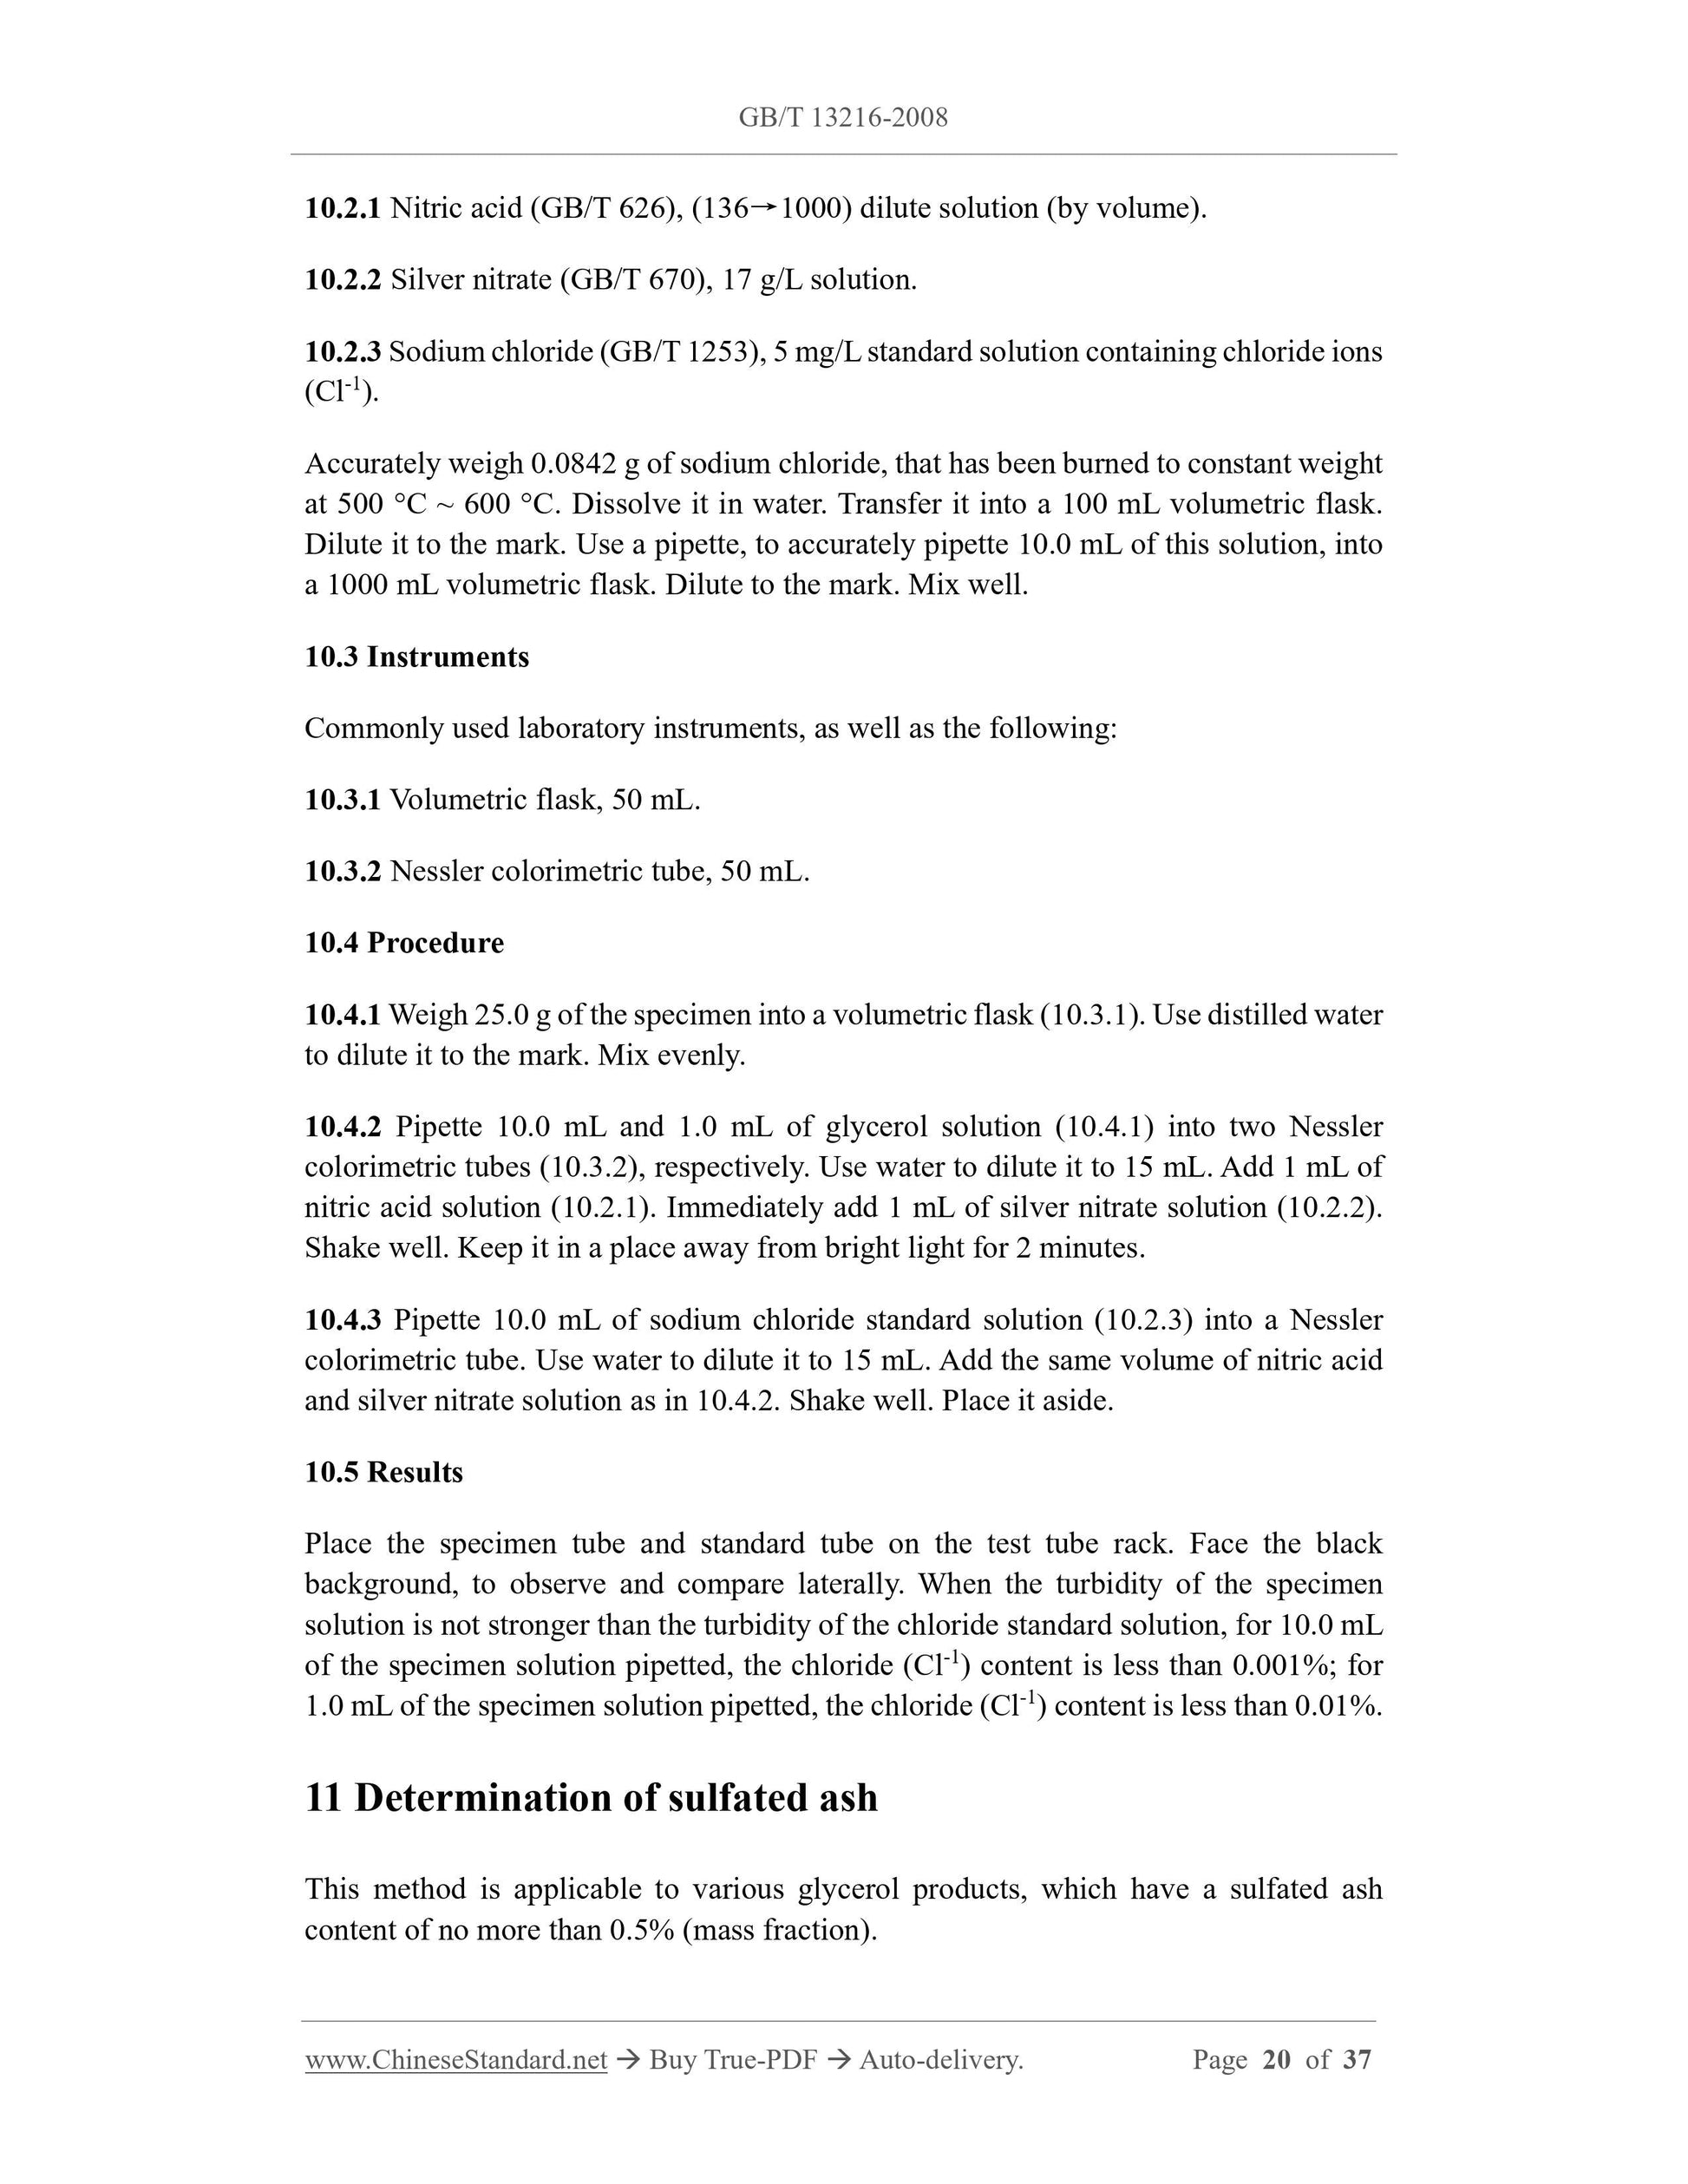 GB/T 13216-2008 Page 9